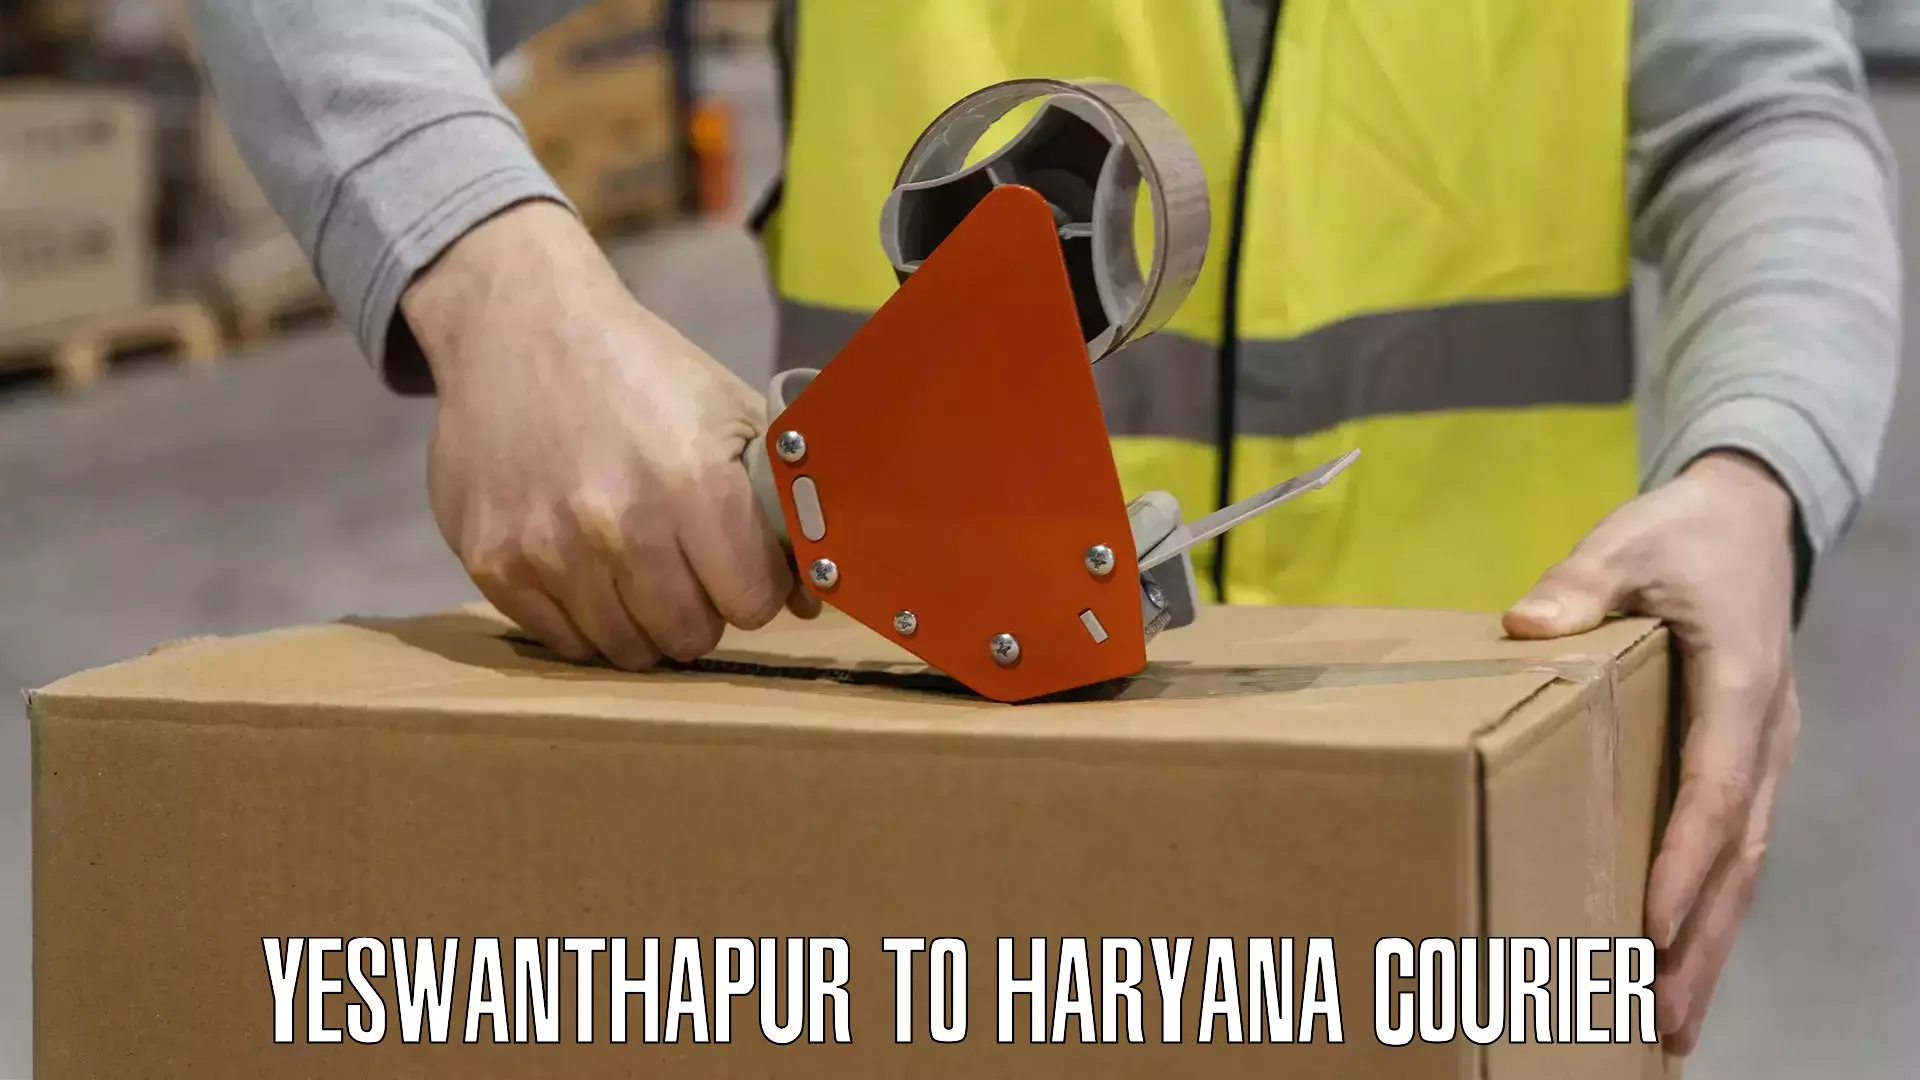 State-of-the-art courier technology Yeswanthapur to Bilaspur Haryana